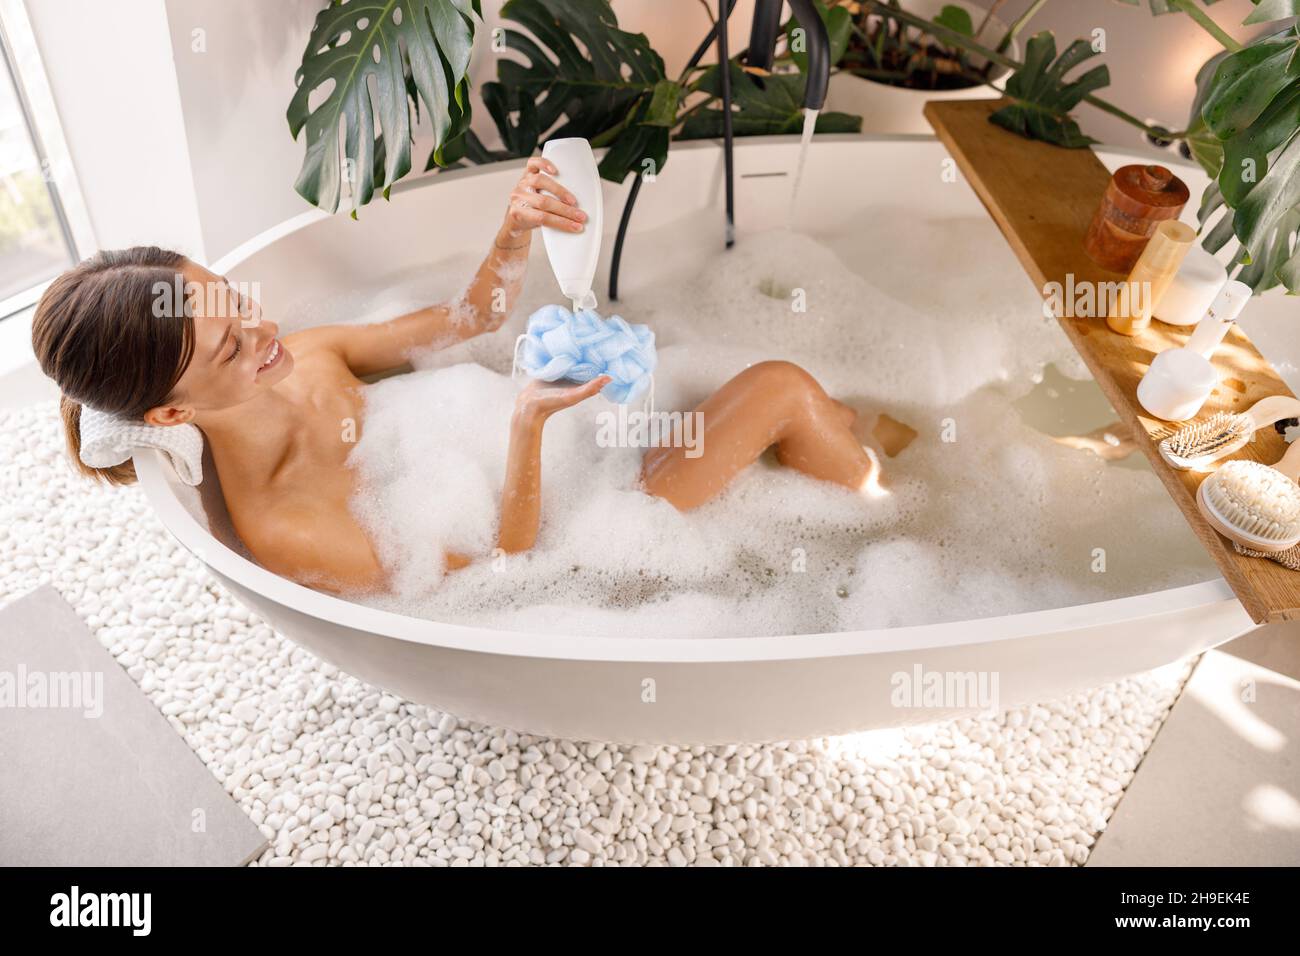 Relaxed young woman pouring shower gel from bottle onto loofah sponge while bathing Stock Photo